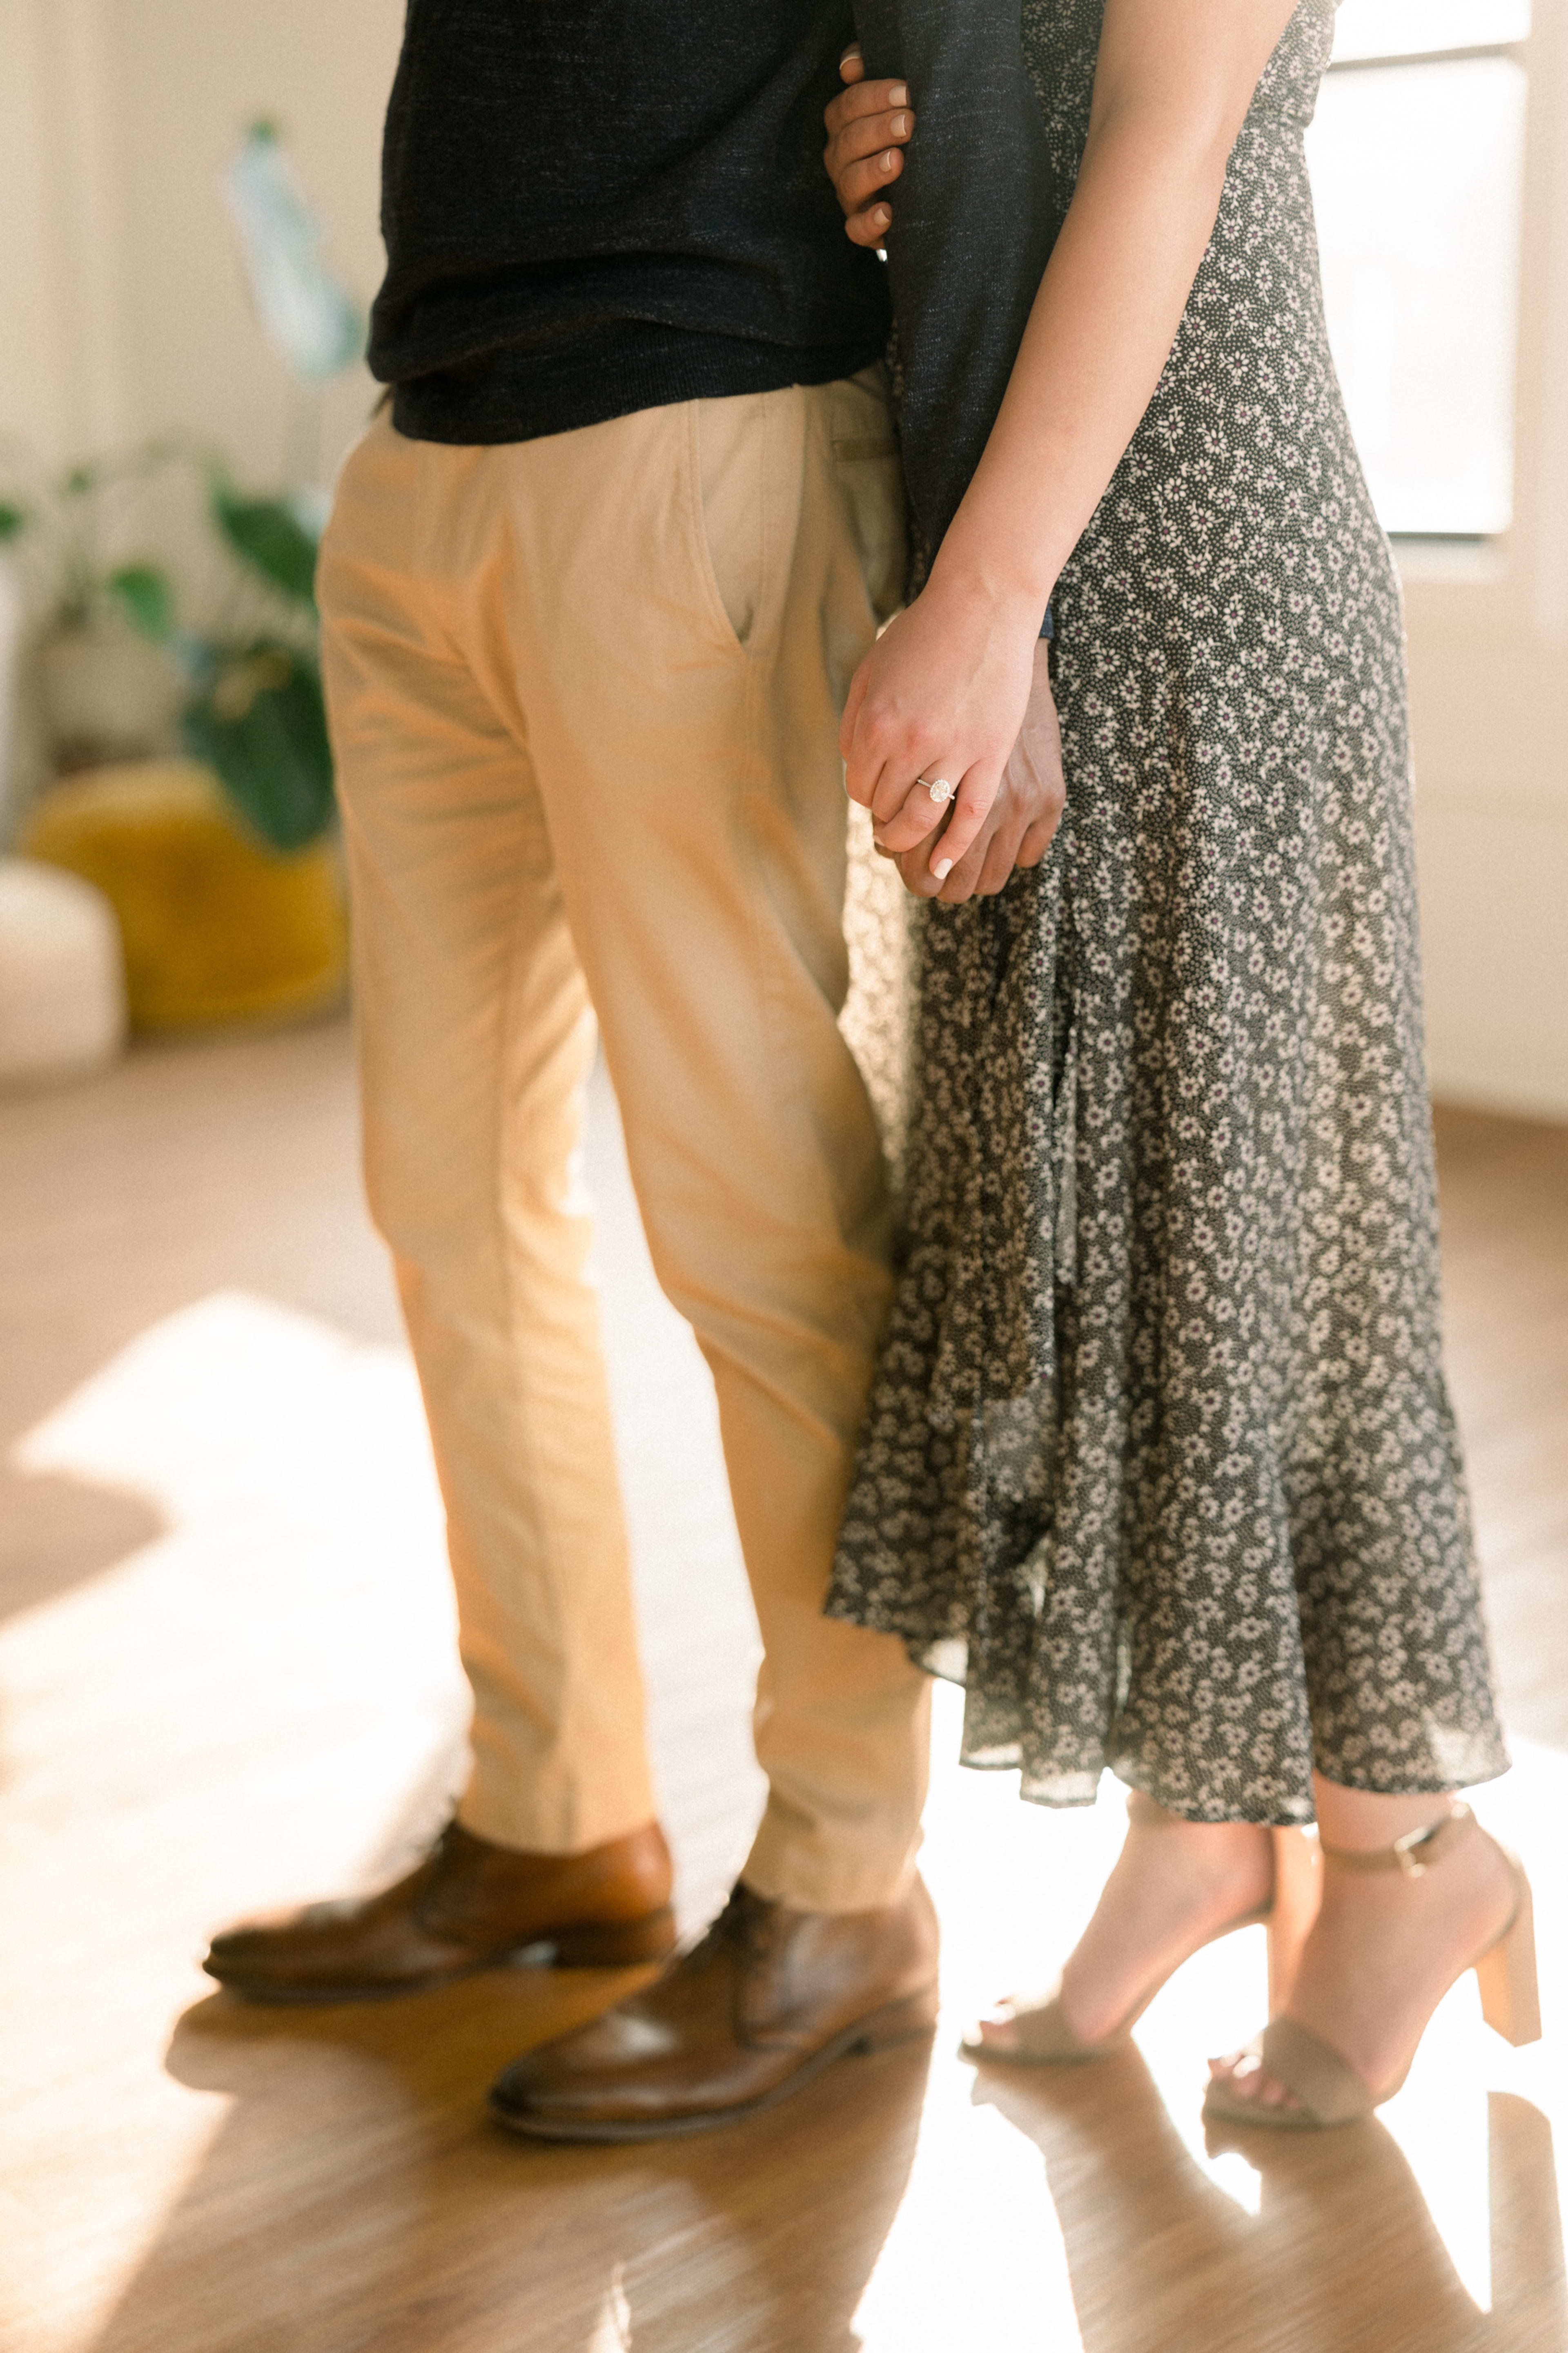 A couple standing on a wooden holding hands floor during an engagement photoshoot.